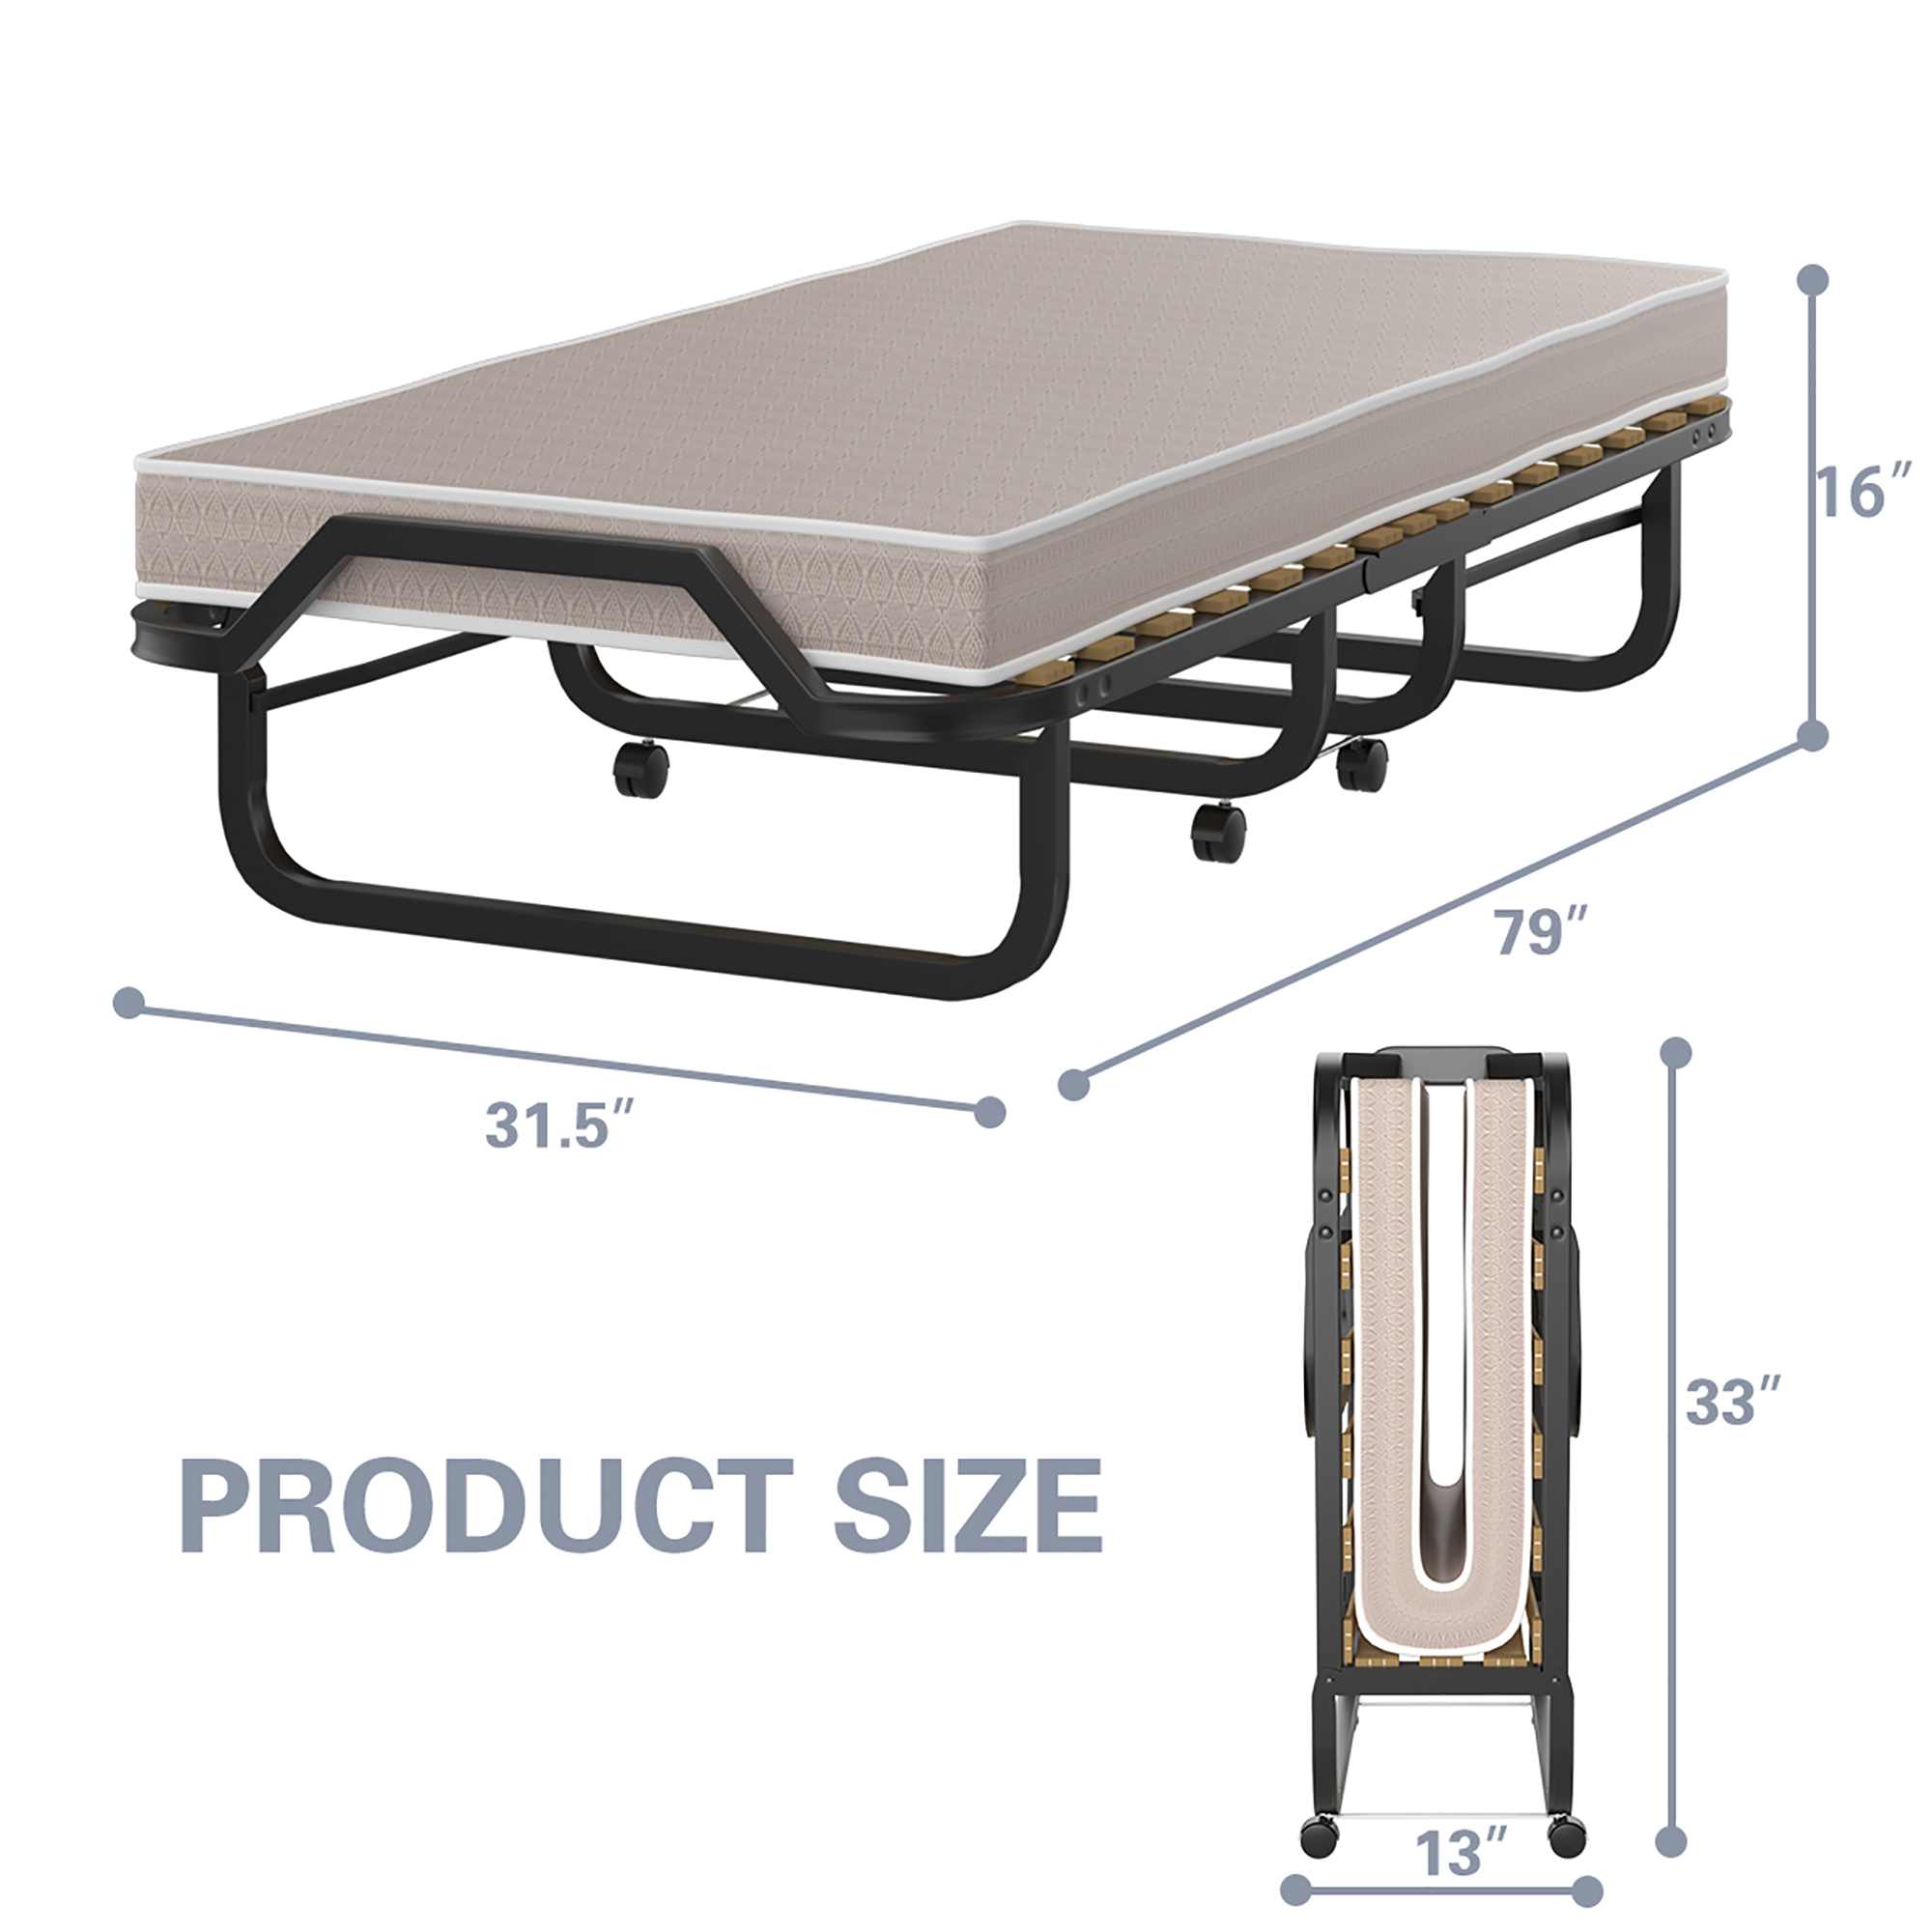 Costway Folding Bed Rollaway Guest Bed w/ Memory Foam Sturdy Metal Frame & Foam Mattress, Made in Italy (Product Dimensions: 79L x 31.5W x 16 H inch) - image 2 of 7